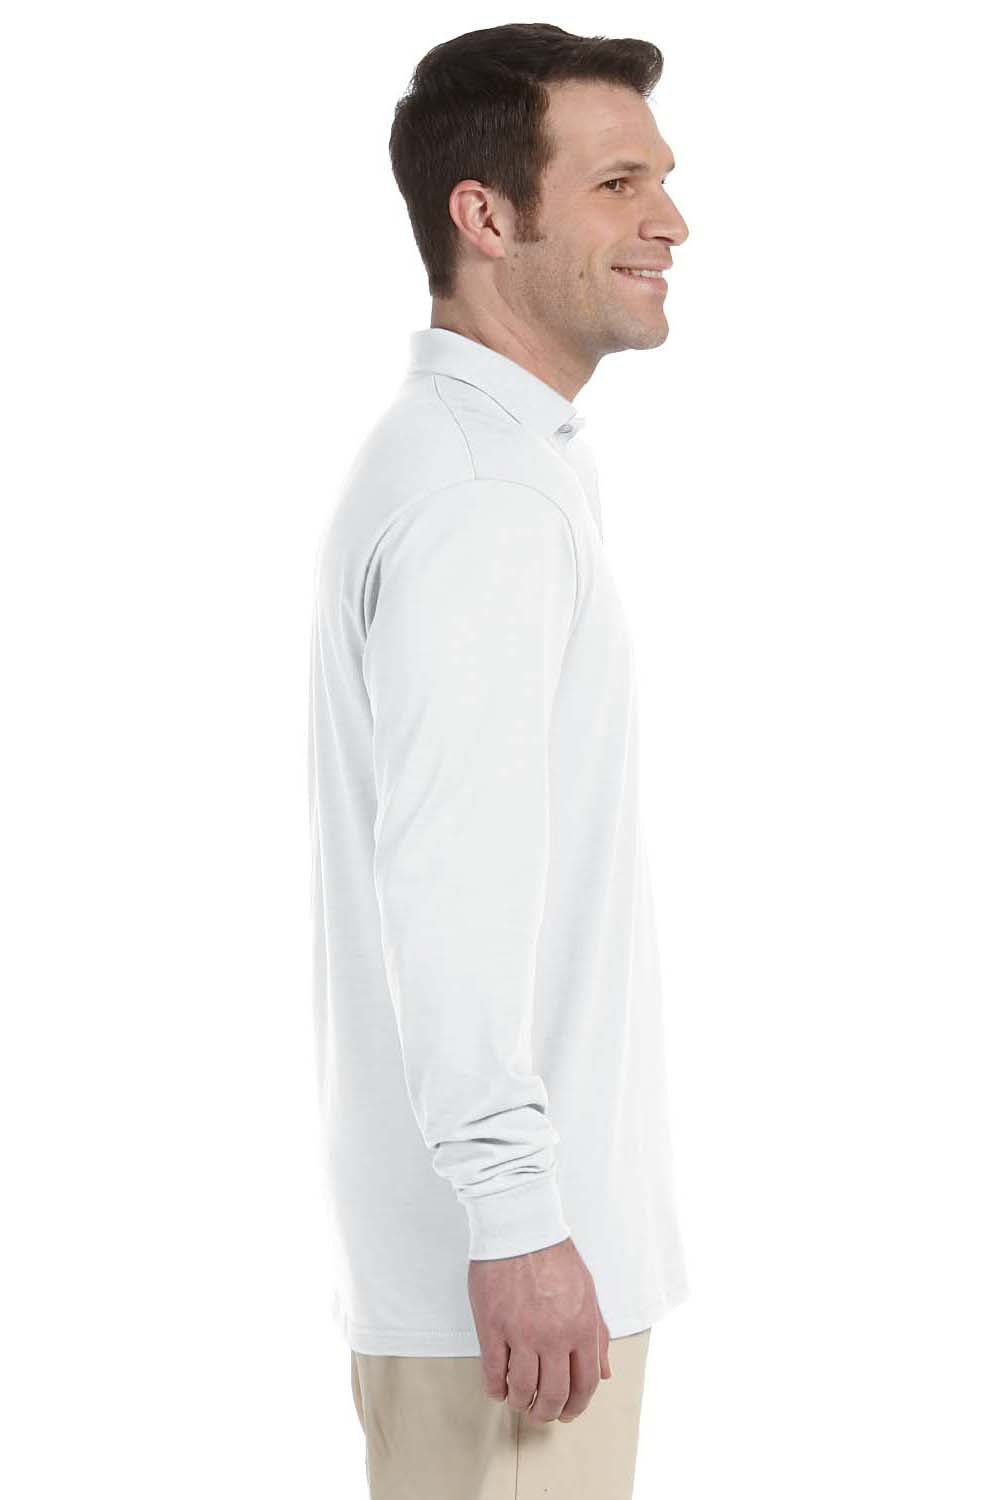 Jerzees 437ML Mens SpotShield Stain Resistant Long Sleeve Polo Shirt White Side